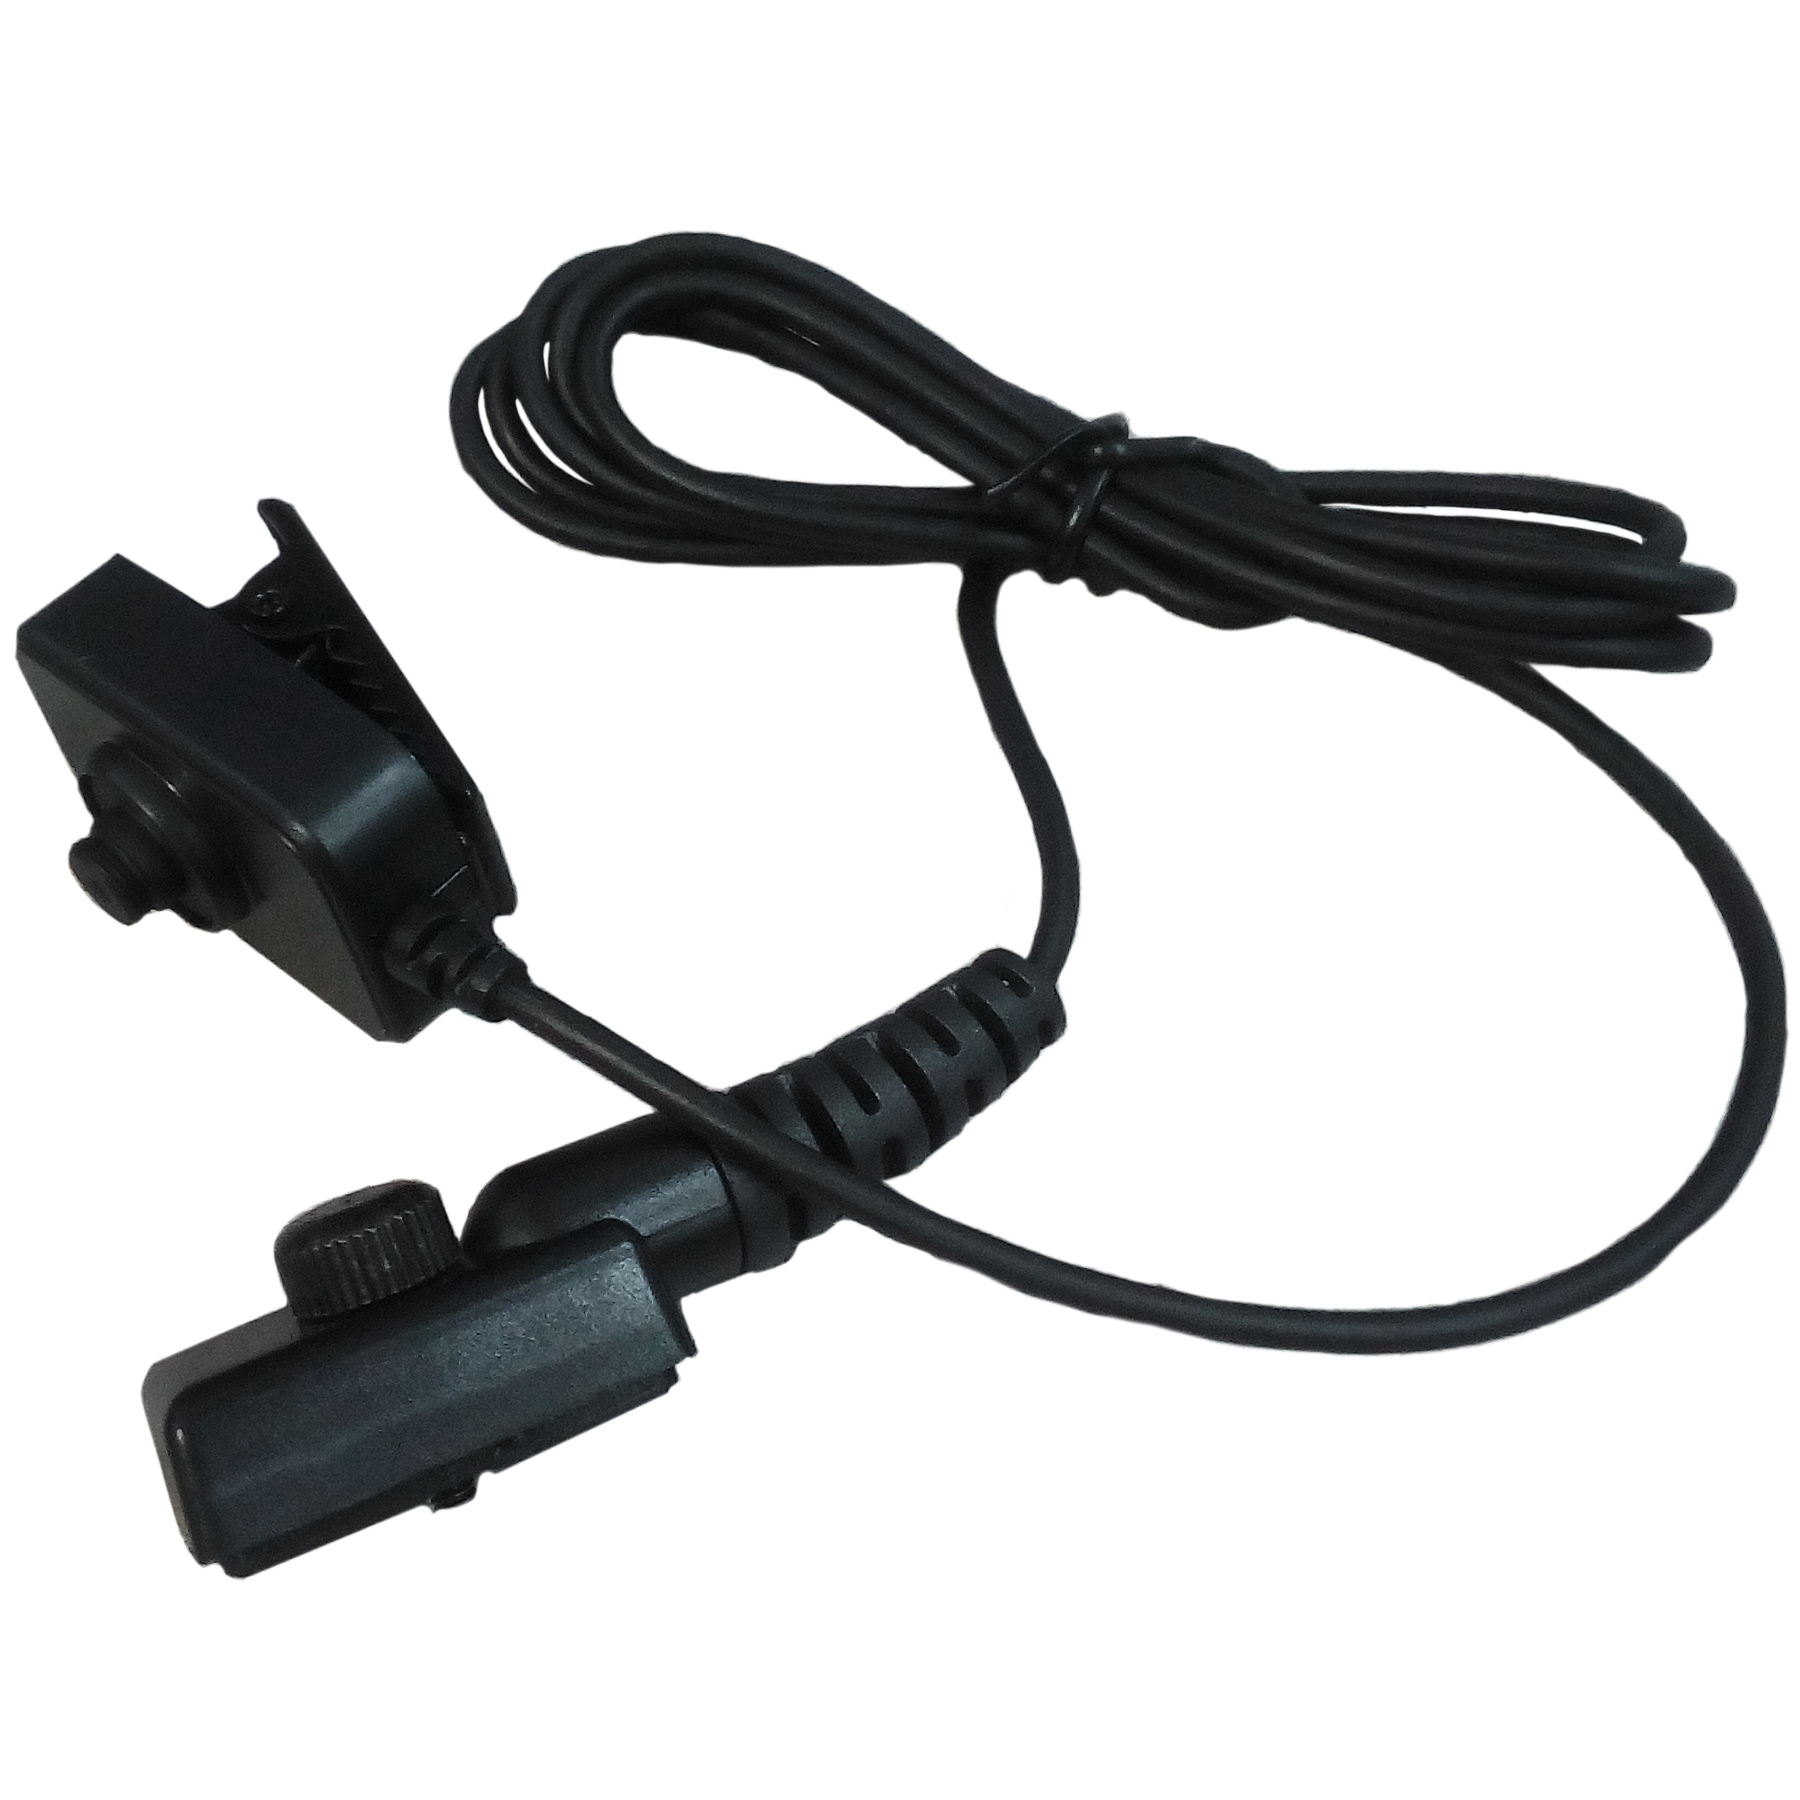 4G body camera cables